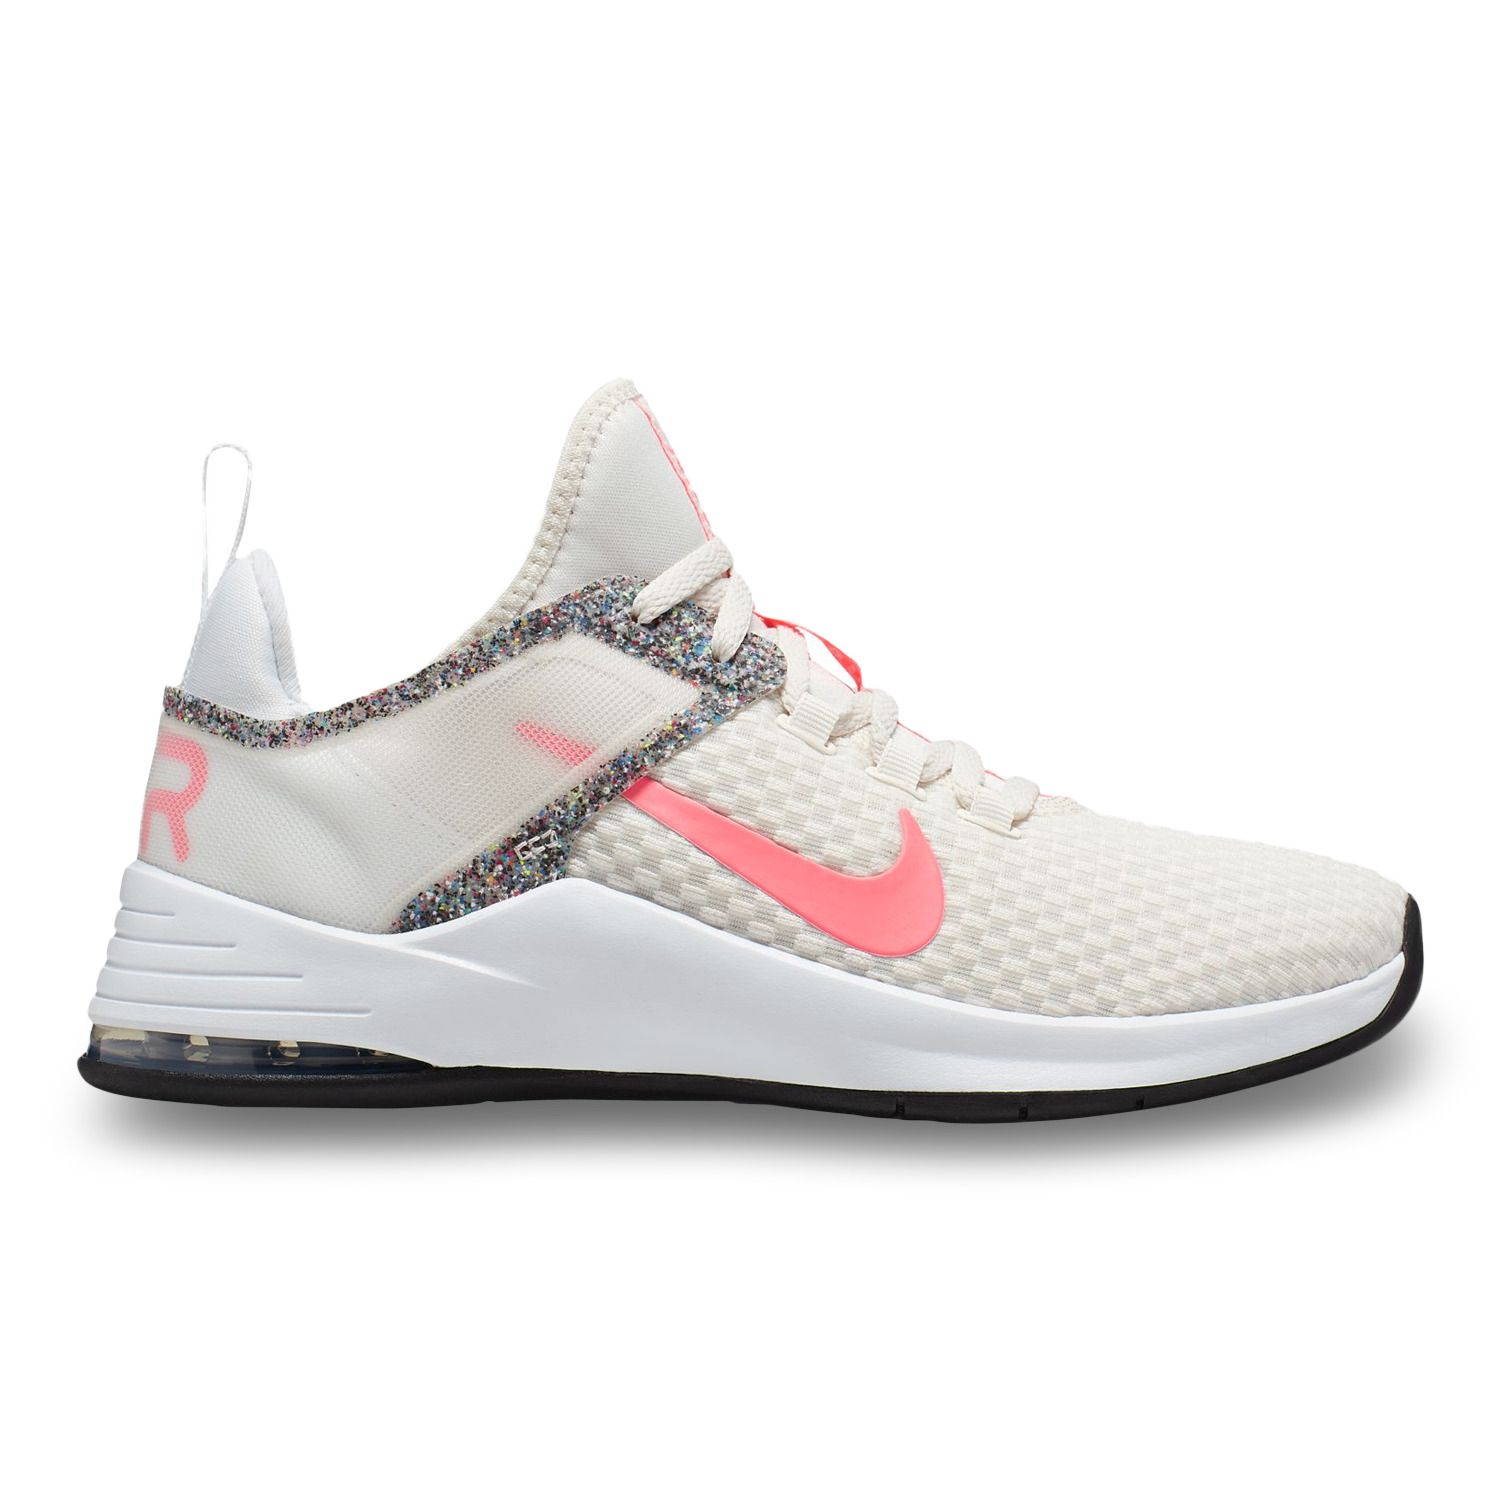 nike women's air max bella tr 2 training shoes stores